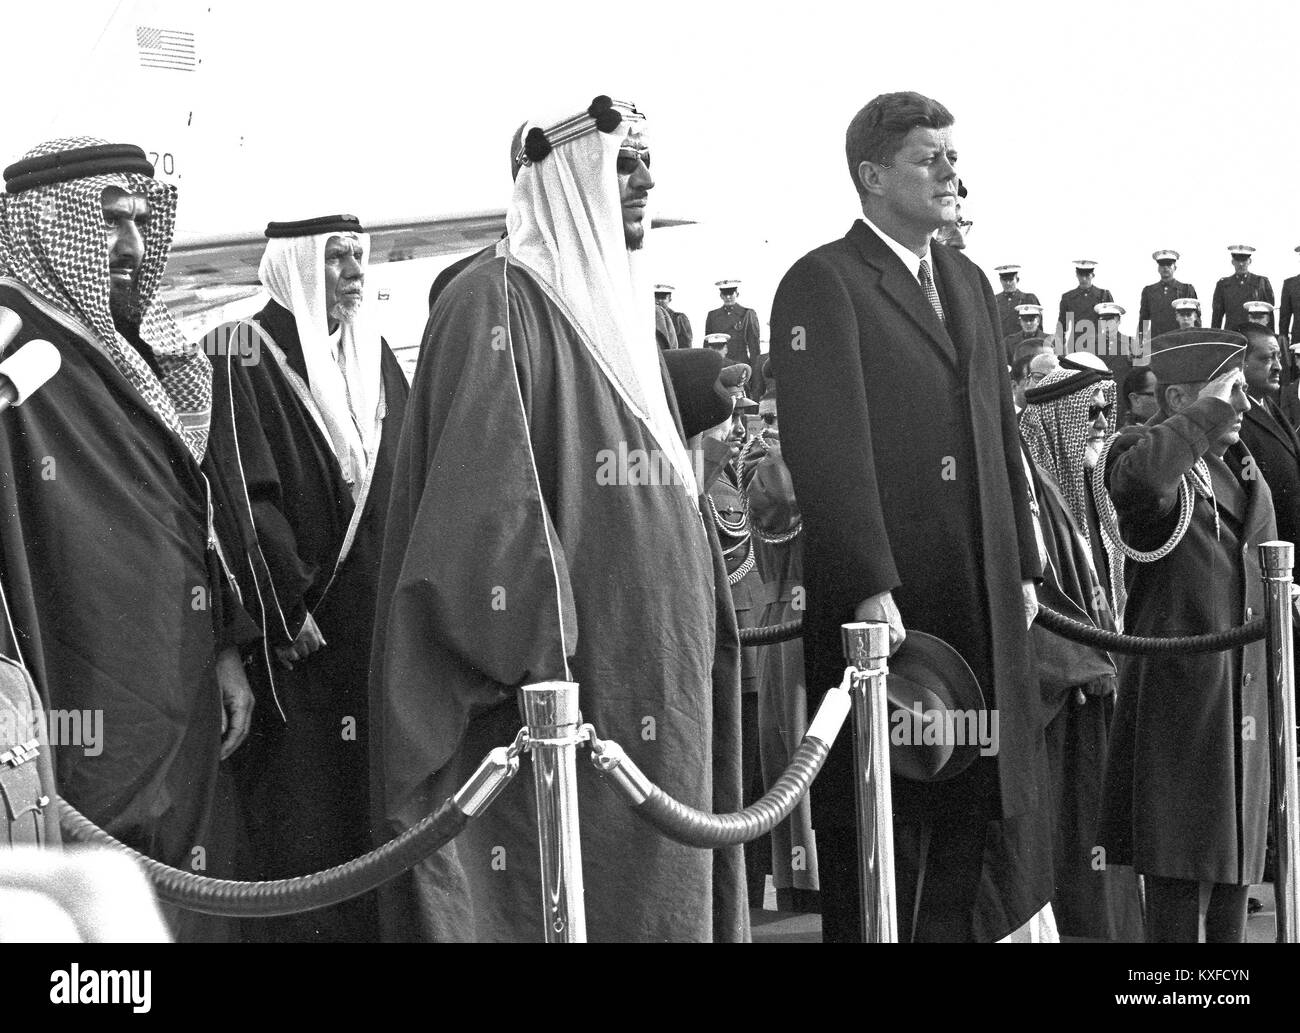 King Saud bin Abdulaziz Al Saud of Saudi Arabia makes remarks as he is welcomed to the United States by US President John F. Kennedy during a ceremony at Andrews Air Force Base, Maryland on February 13, 1962.  From left to right: unidentified, President Kennedy, King Saud, US Secretary of State Dean Rusk, unidentified, and unidentified. Credit: Arnie Sachs / CNP /MediaPunch Stock Photo